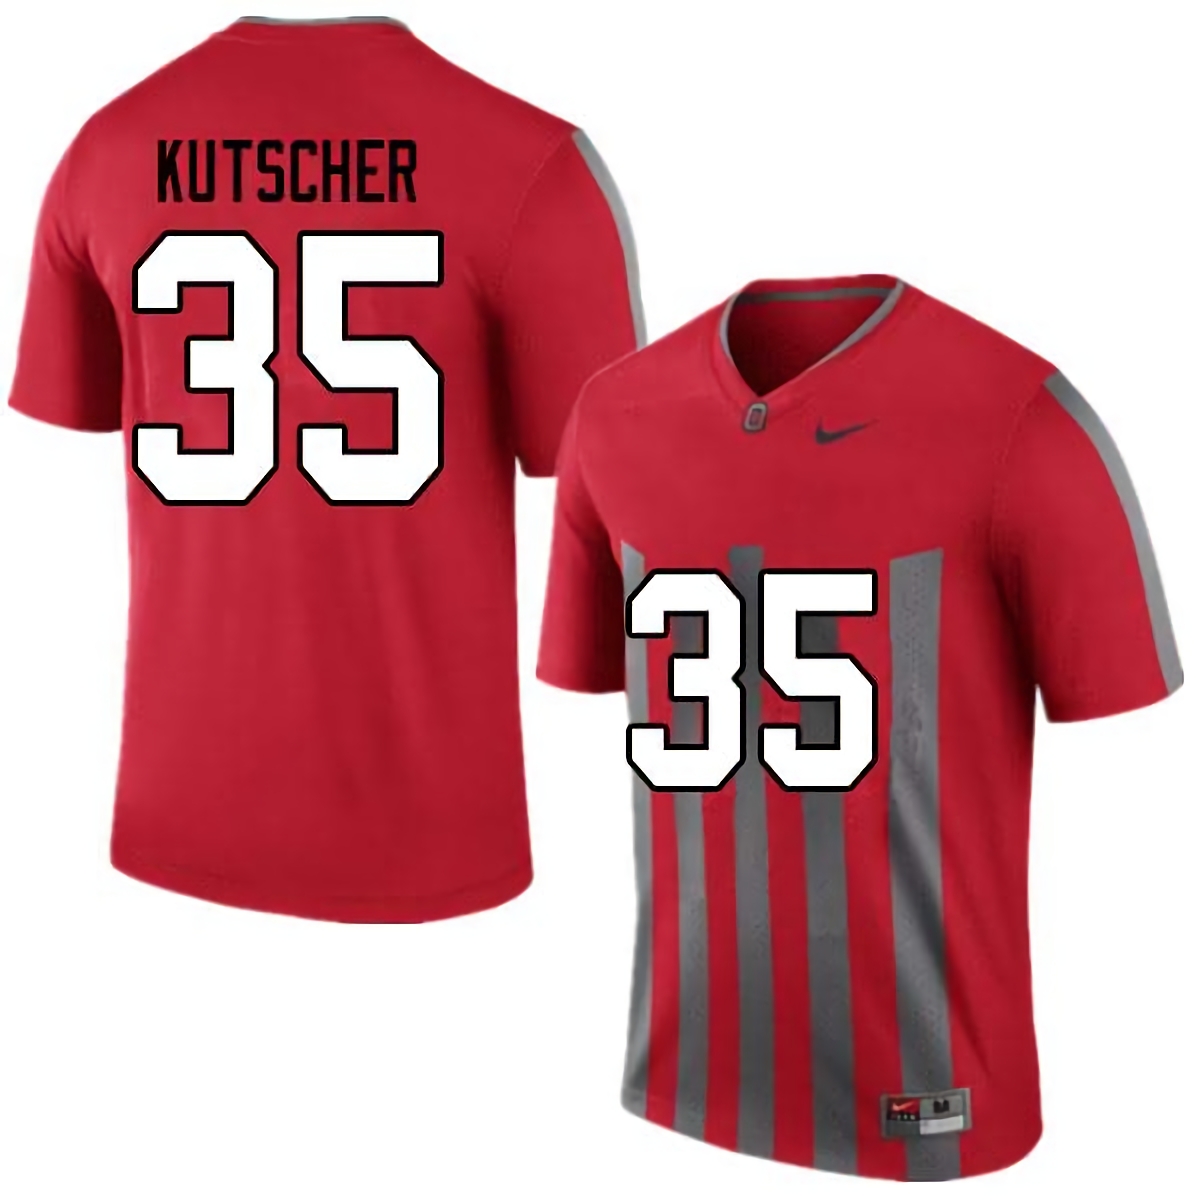 Austin Kutscher Ohio State Buckeyes Men's NCAA #35 Nike Throwback Red College Stitched Football Jersey YPC3756RP